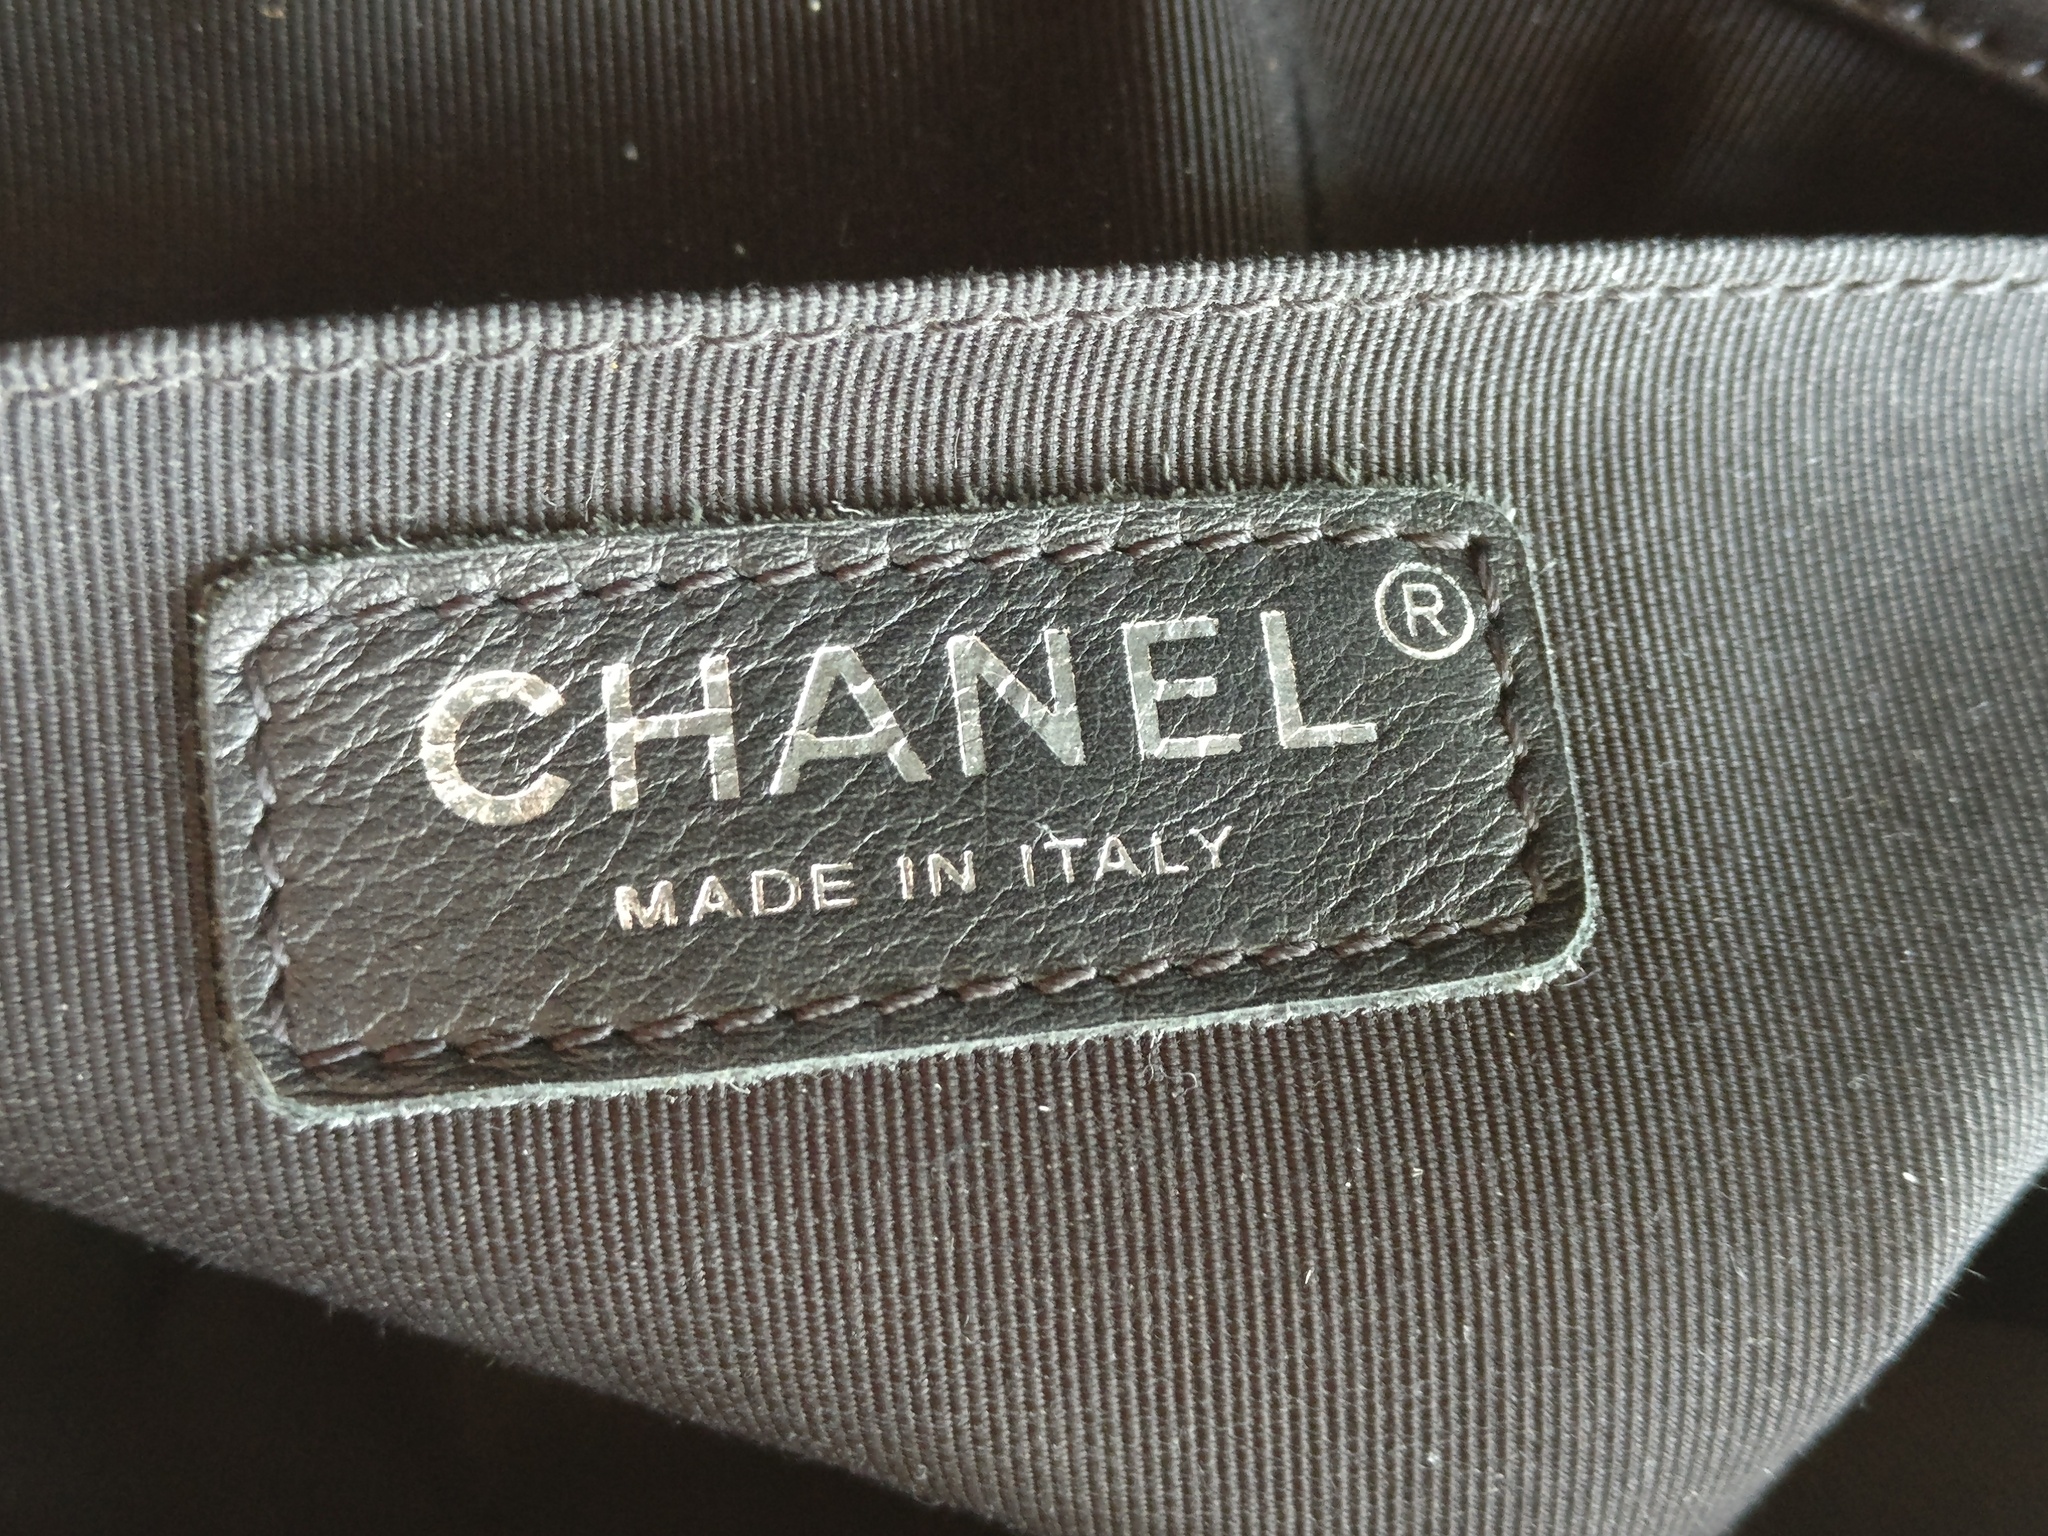 Chanel Boy Old Medium quilted flap bag